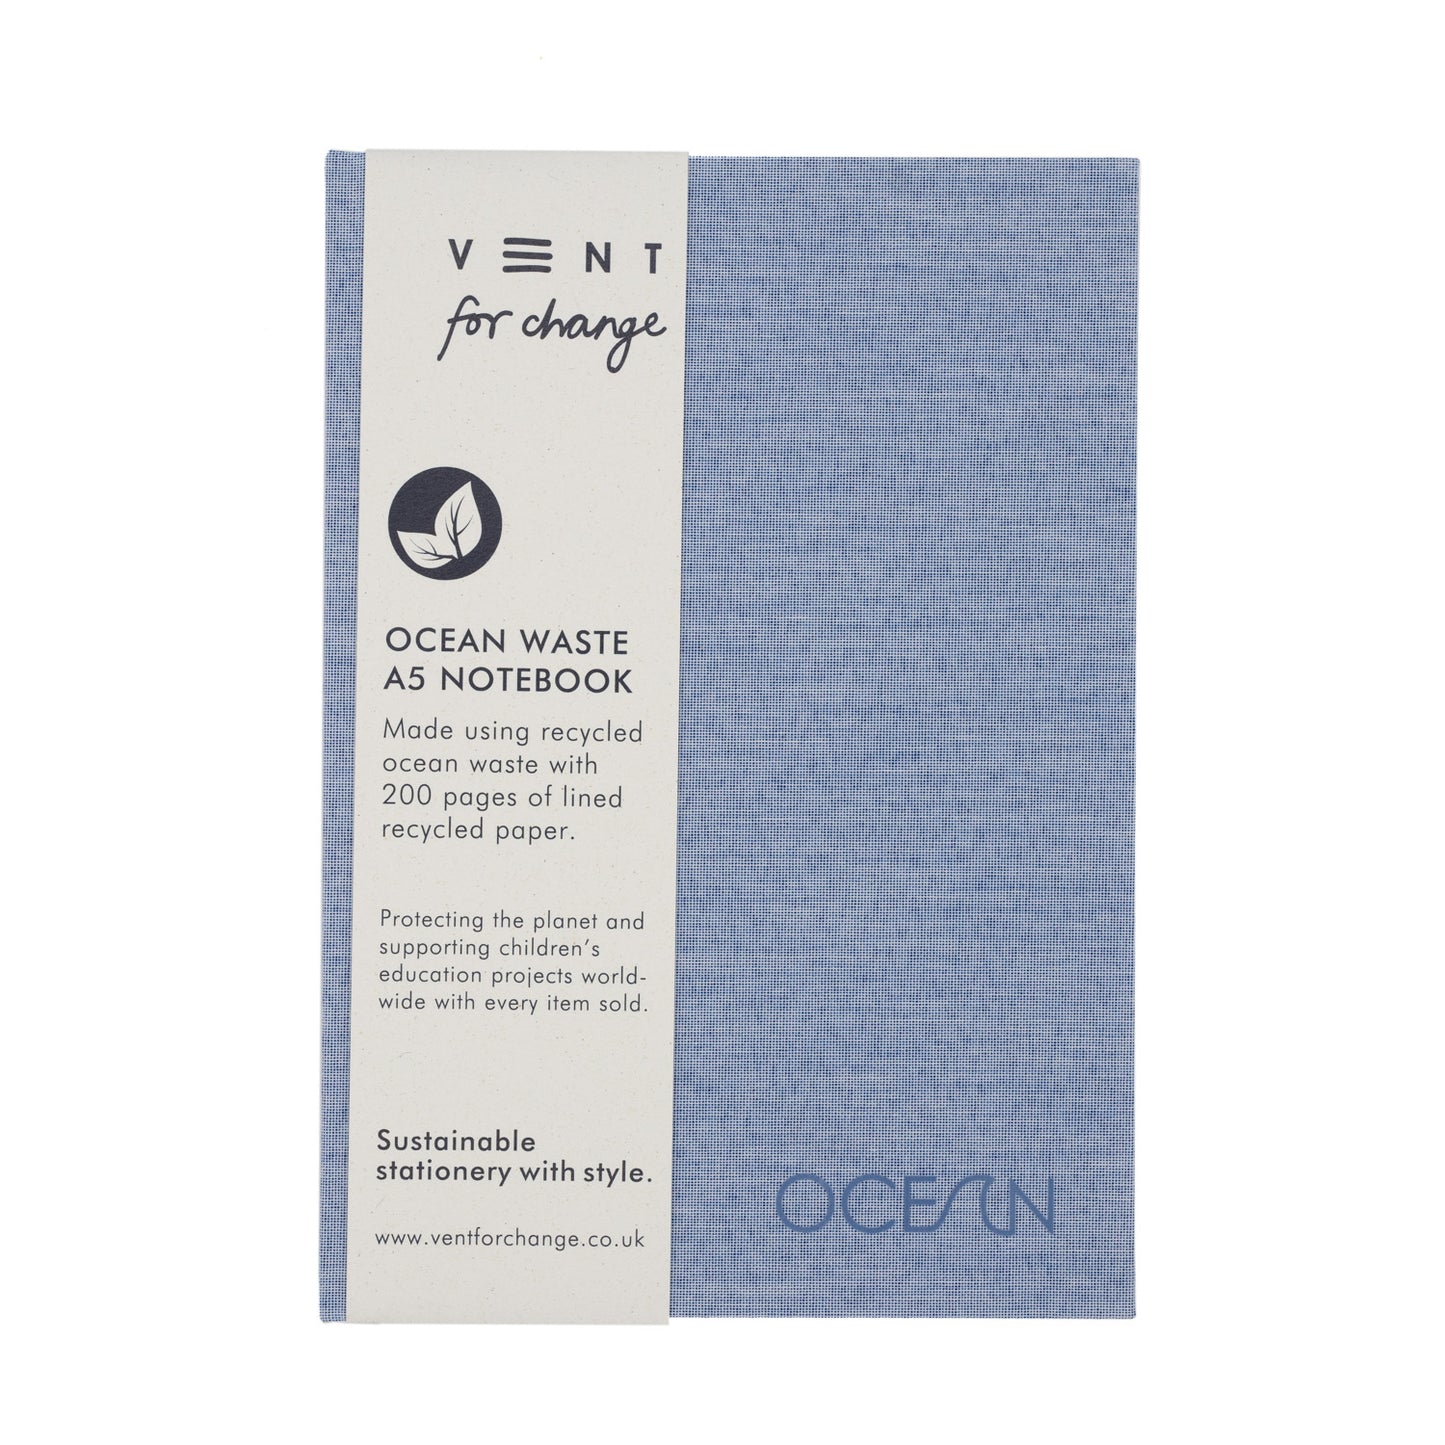 A blue A5 notebook with the text “VENT for change” and “OCEAN WASTE A5 NOTEBOOK” on the cover. The notebook is made from recycled ocean waste and has 200 lined pages of recycled paper. The text on the cover describes the ocean waste project.